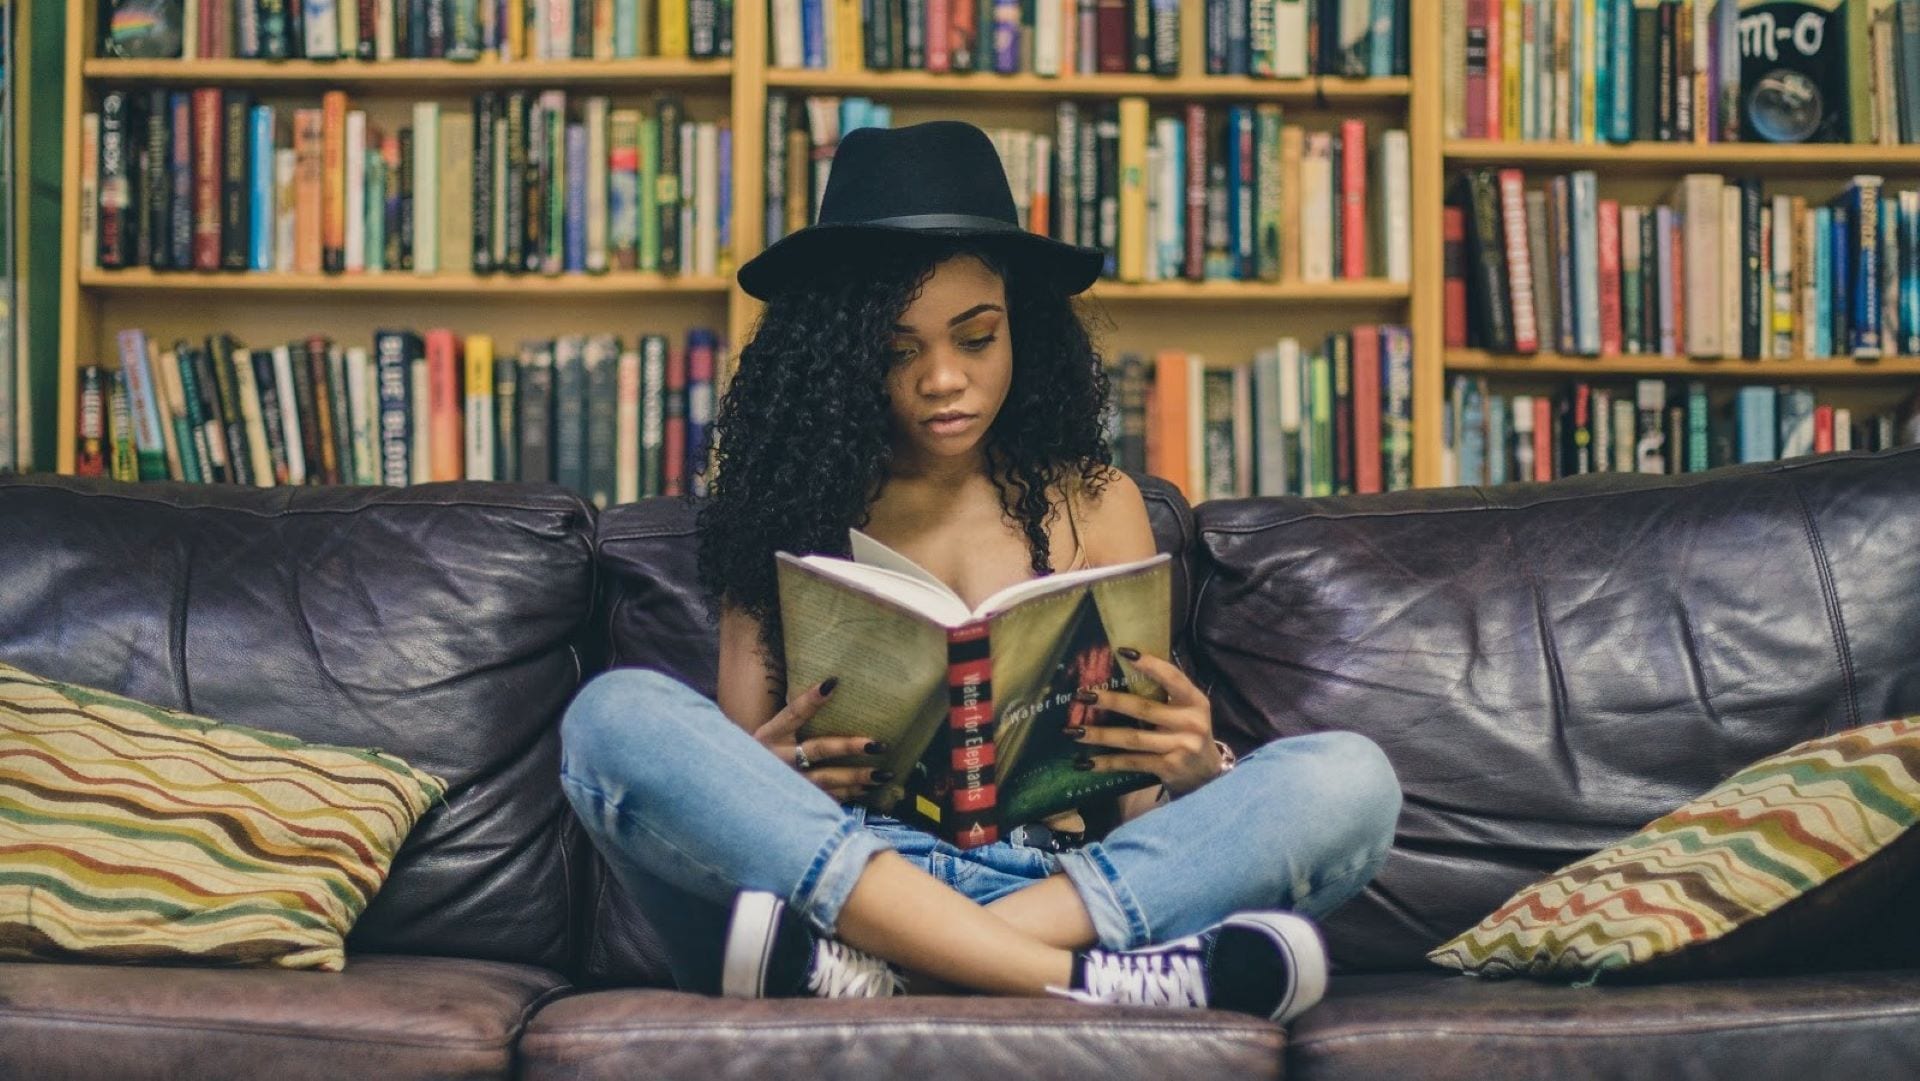 African Students For Liberty have launched a reading challenge